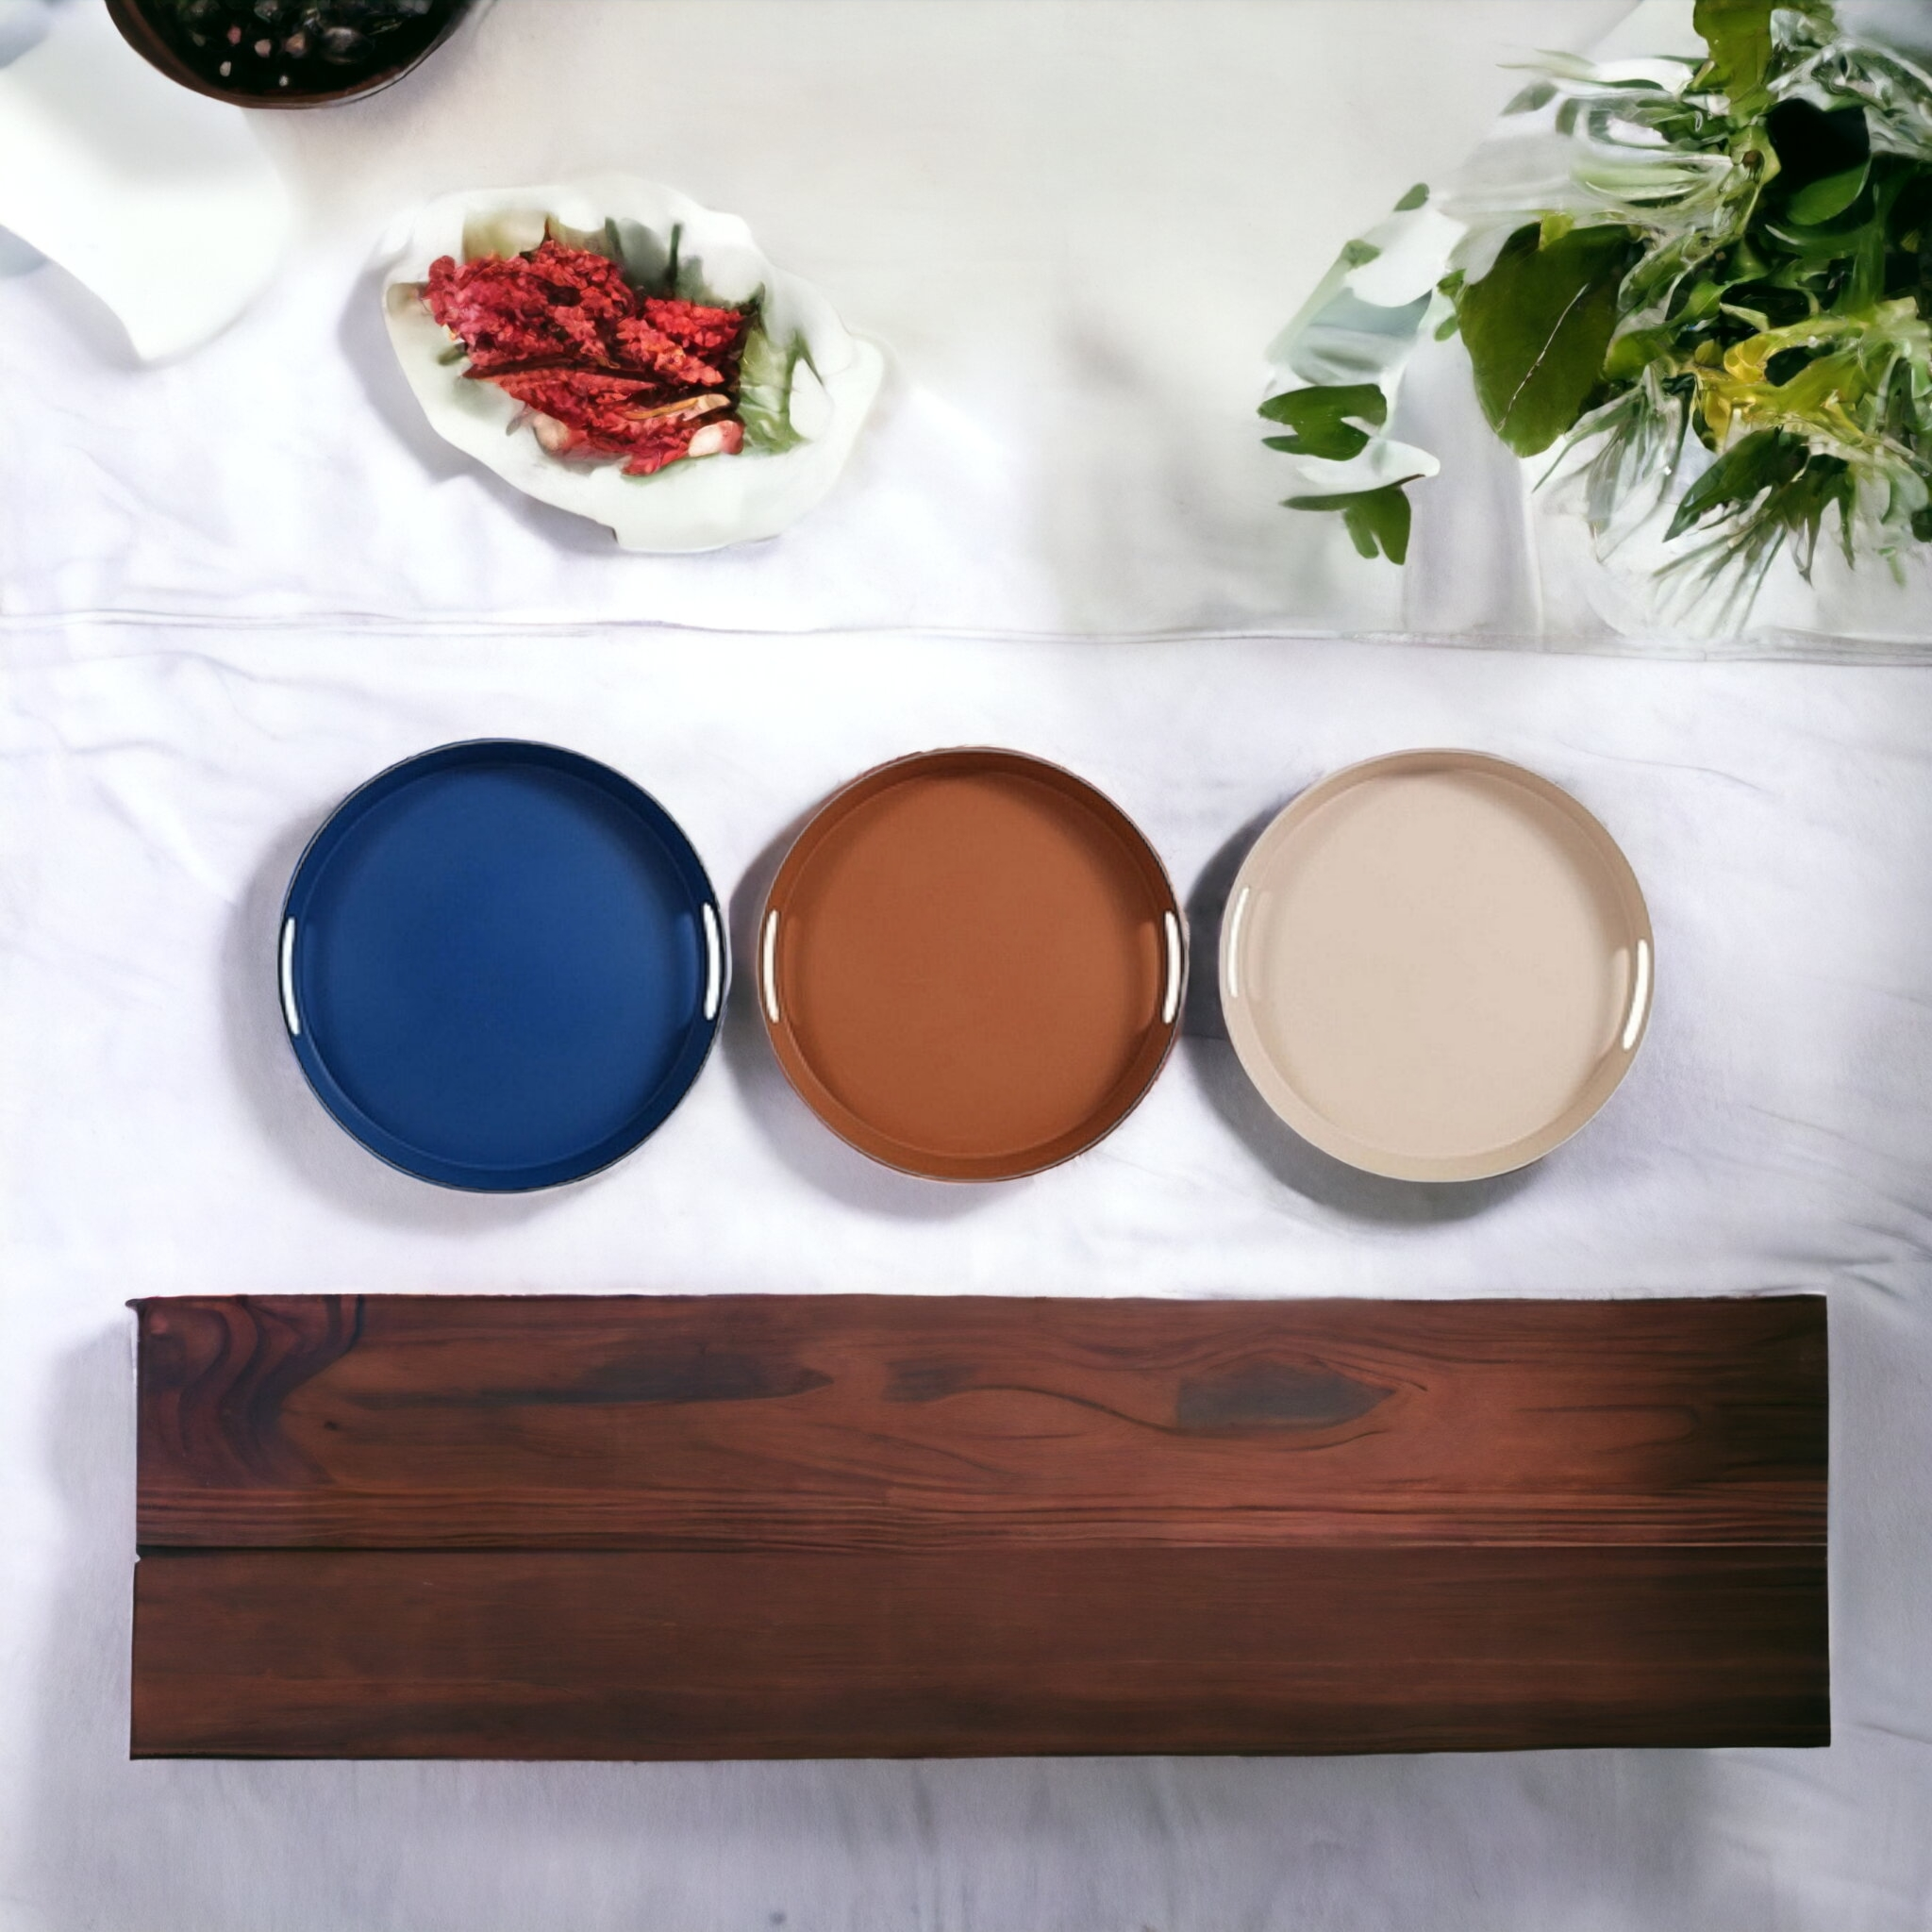 Melamine Serving Tray Round 28cm with Cut out Handles